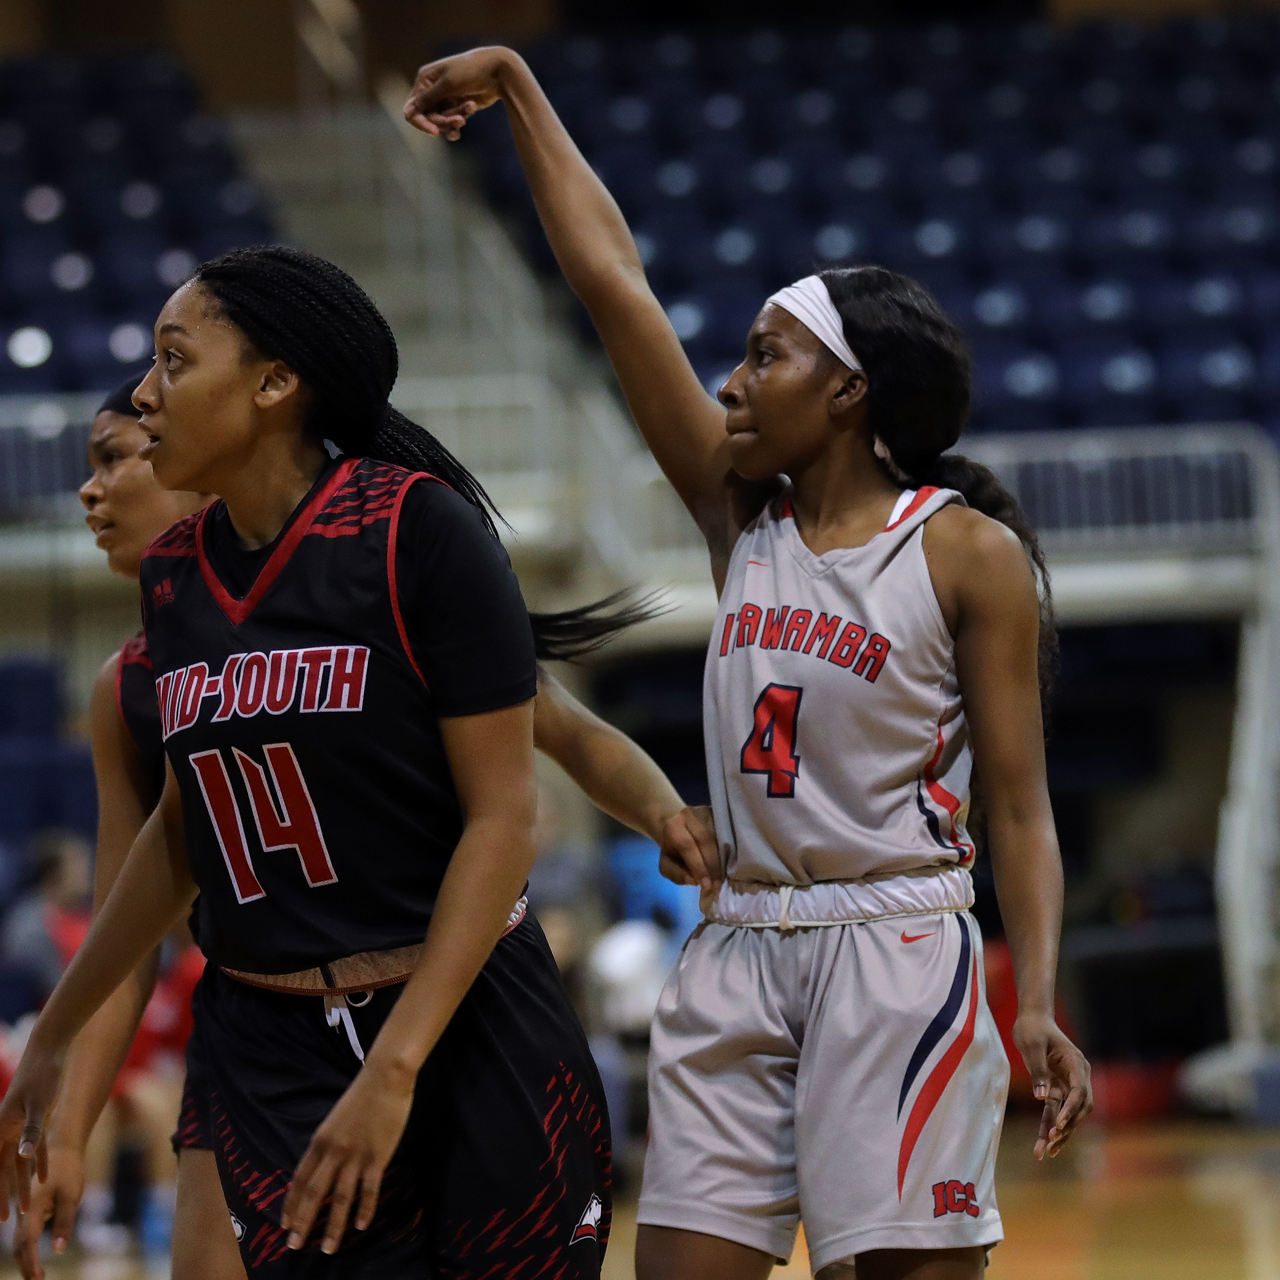 Lady Indians win big over ASU Mid-South